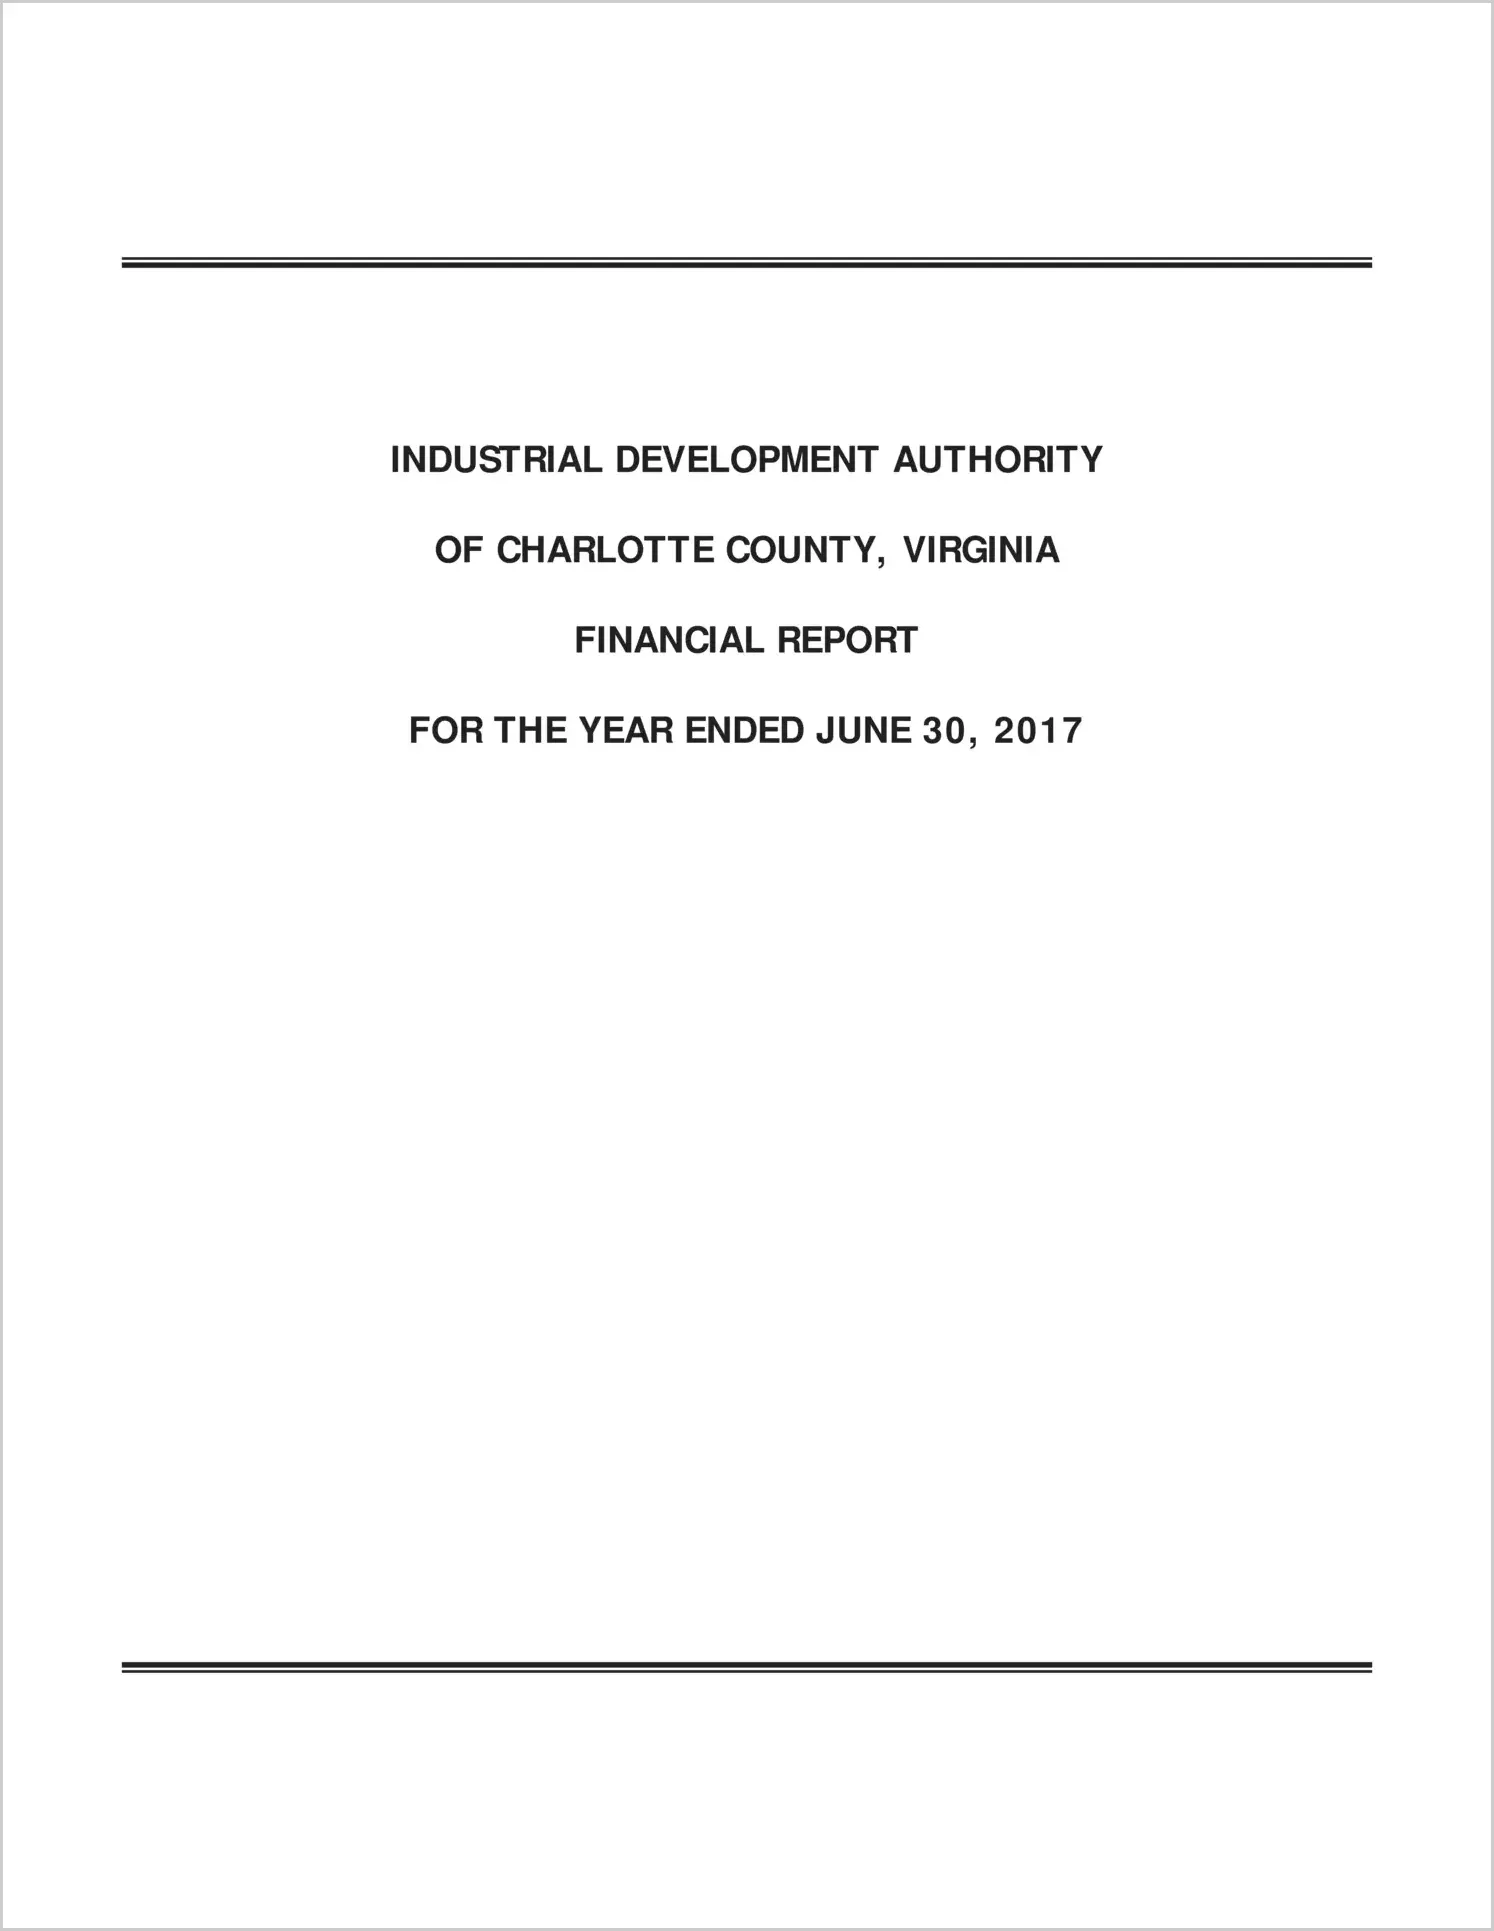 2017 ABC/Other Annual Financial Report  for Charlotte Industrial Development Authority